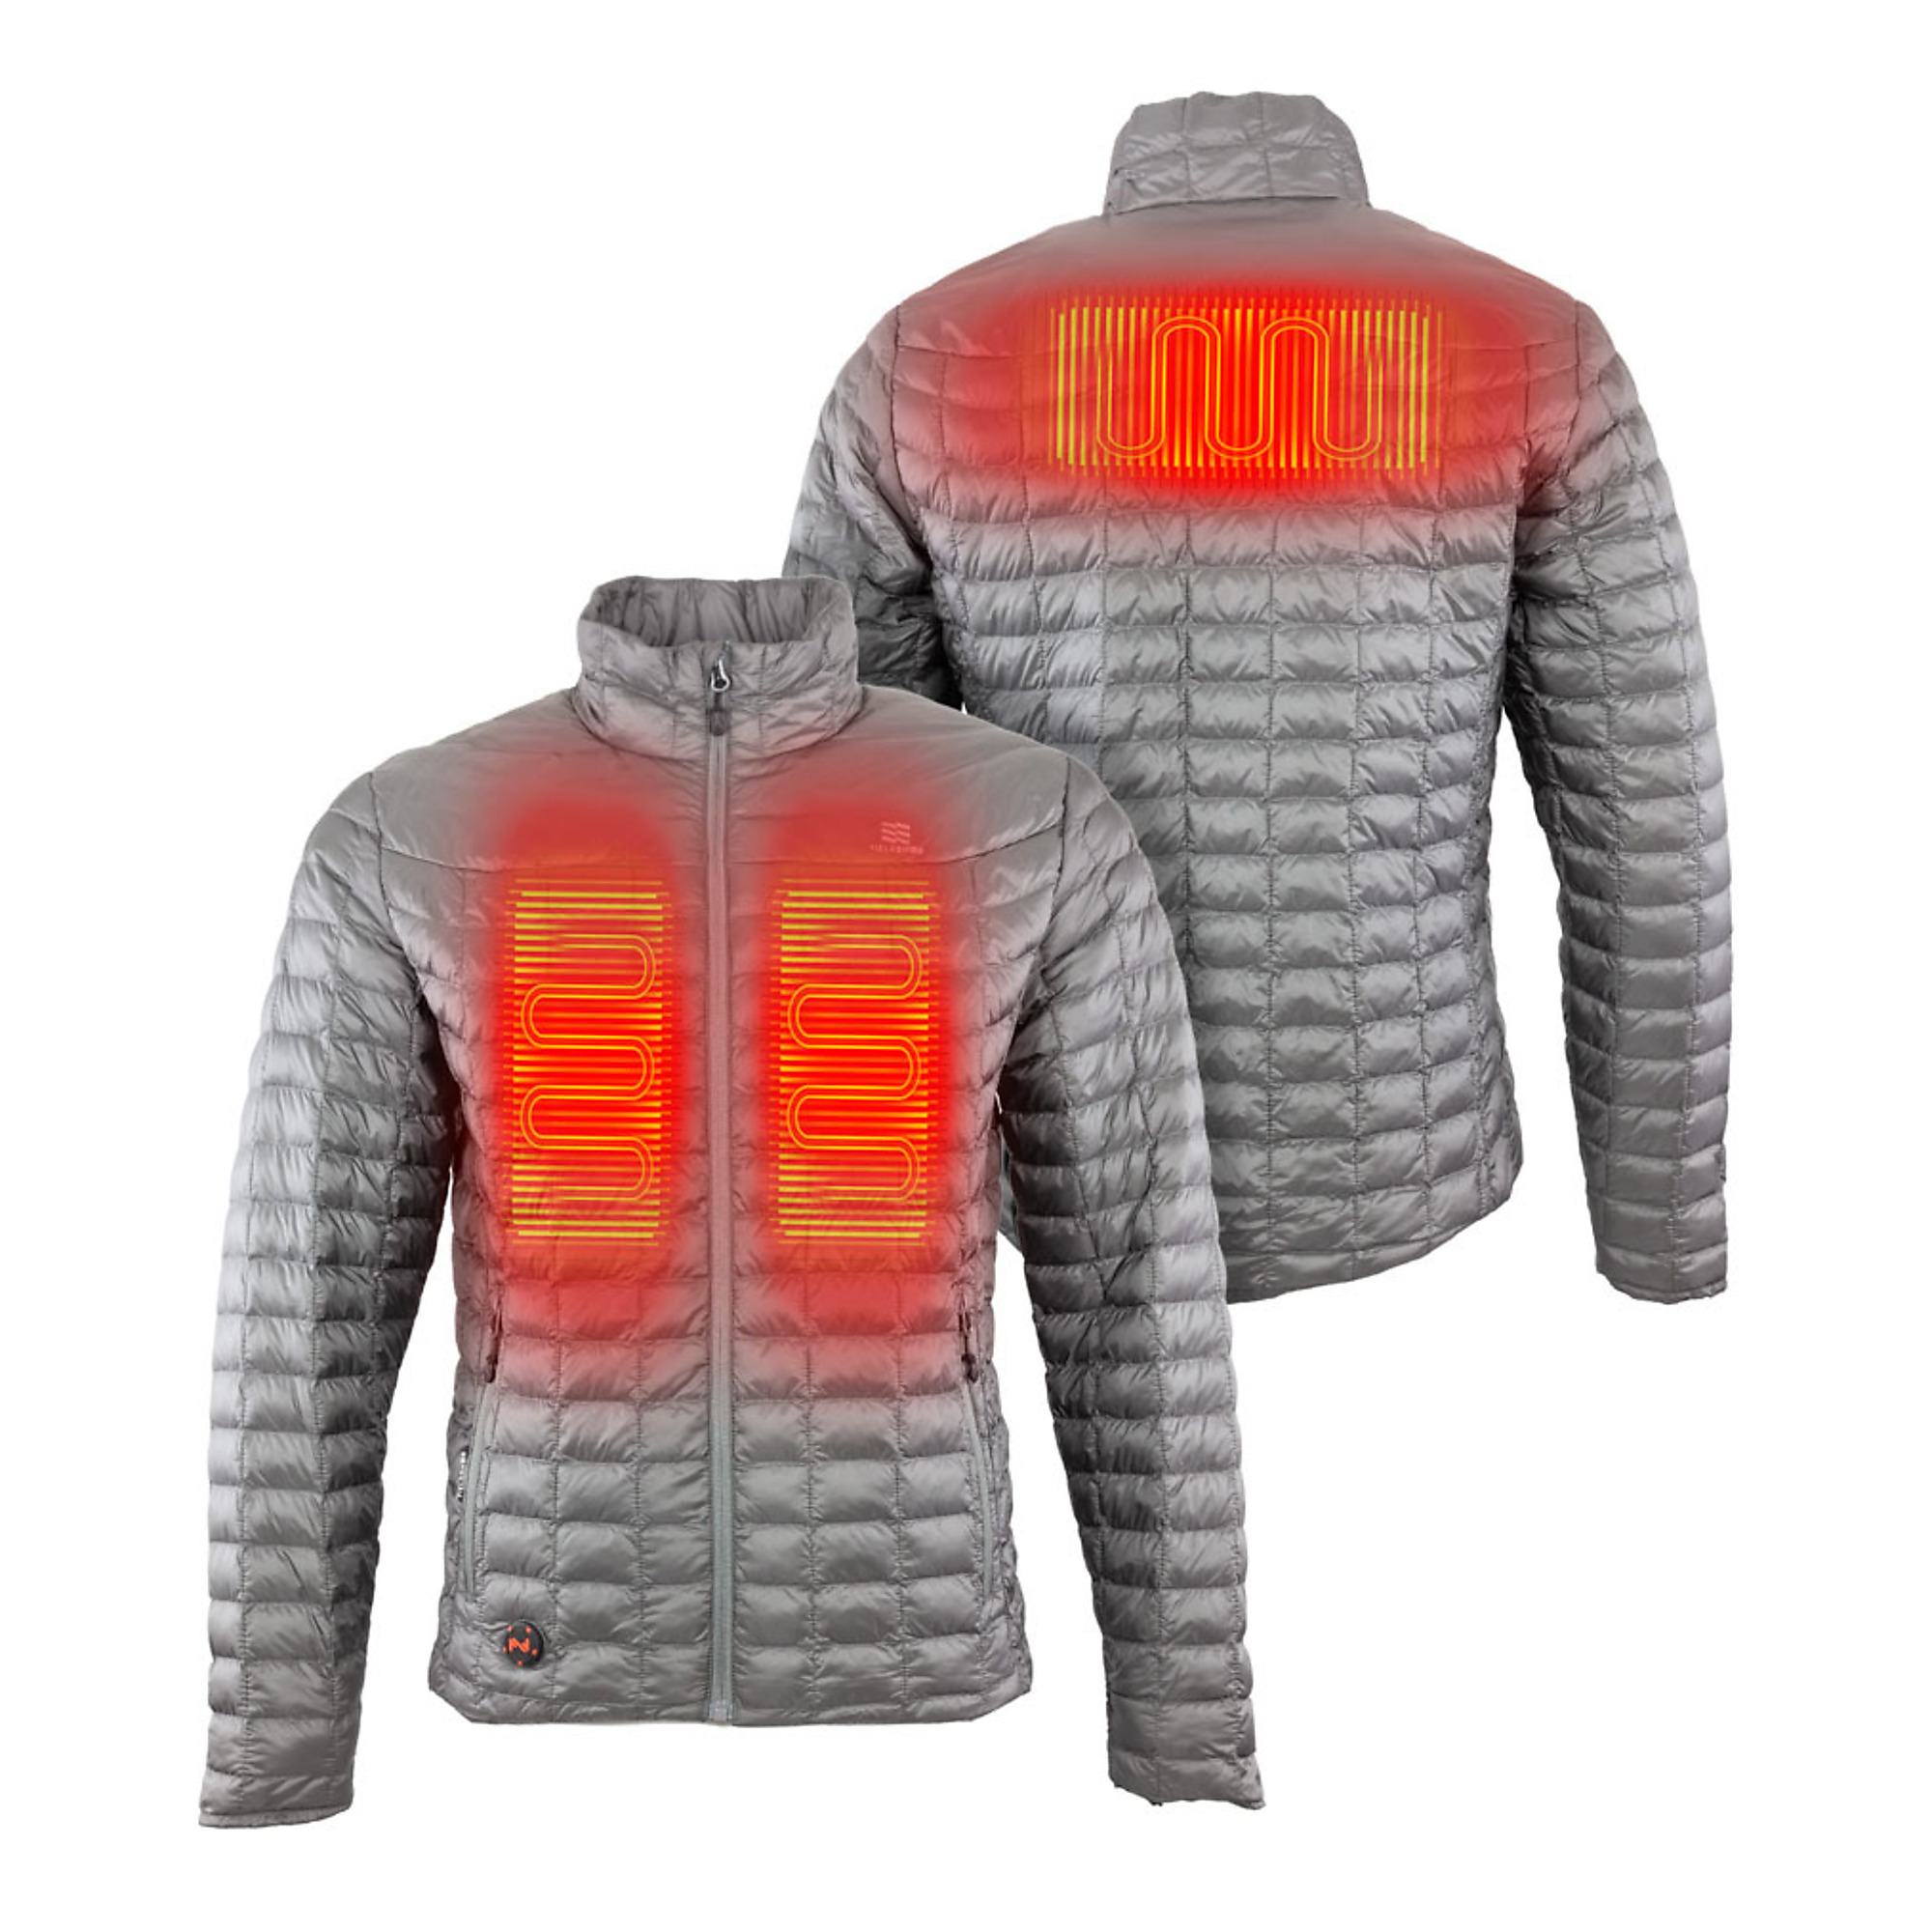 Fieldsheer, Men's Backcountry Heated Jacket with 7.4v Battery, Size M, Color Grey, Model MWMJ04320320